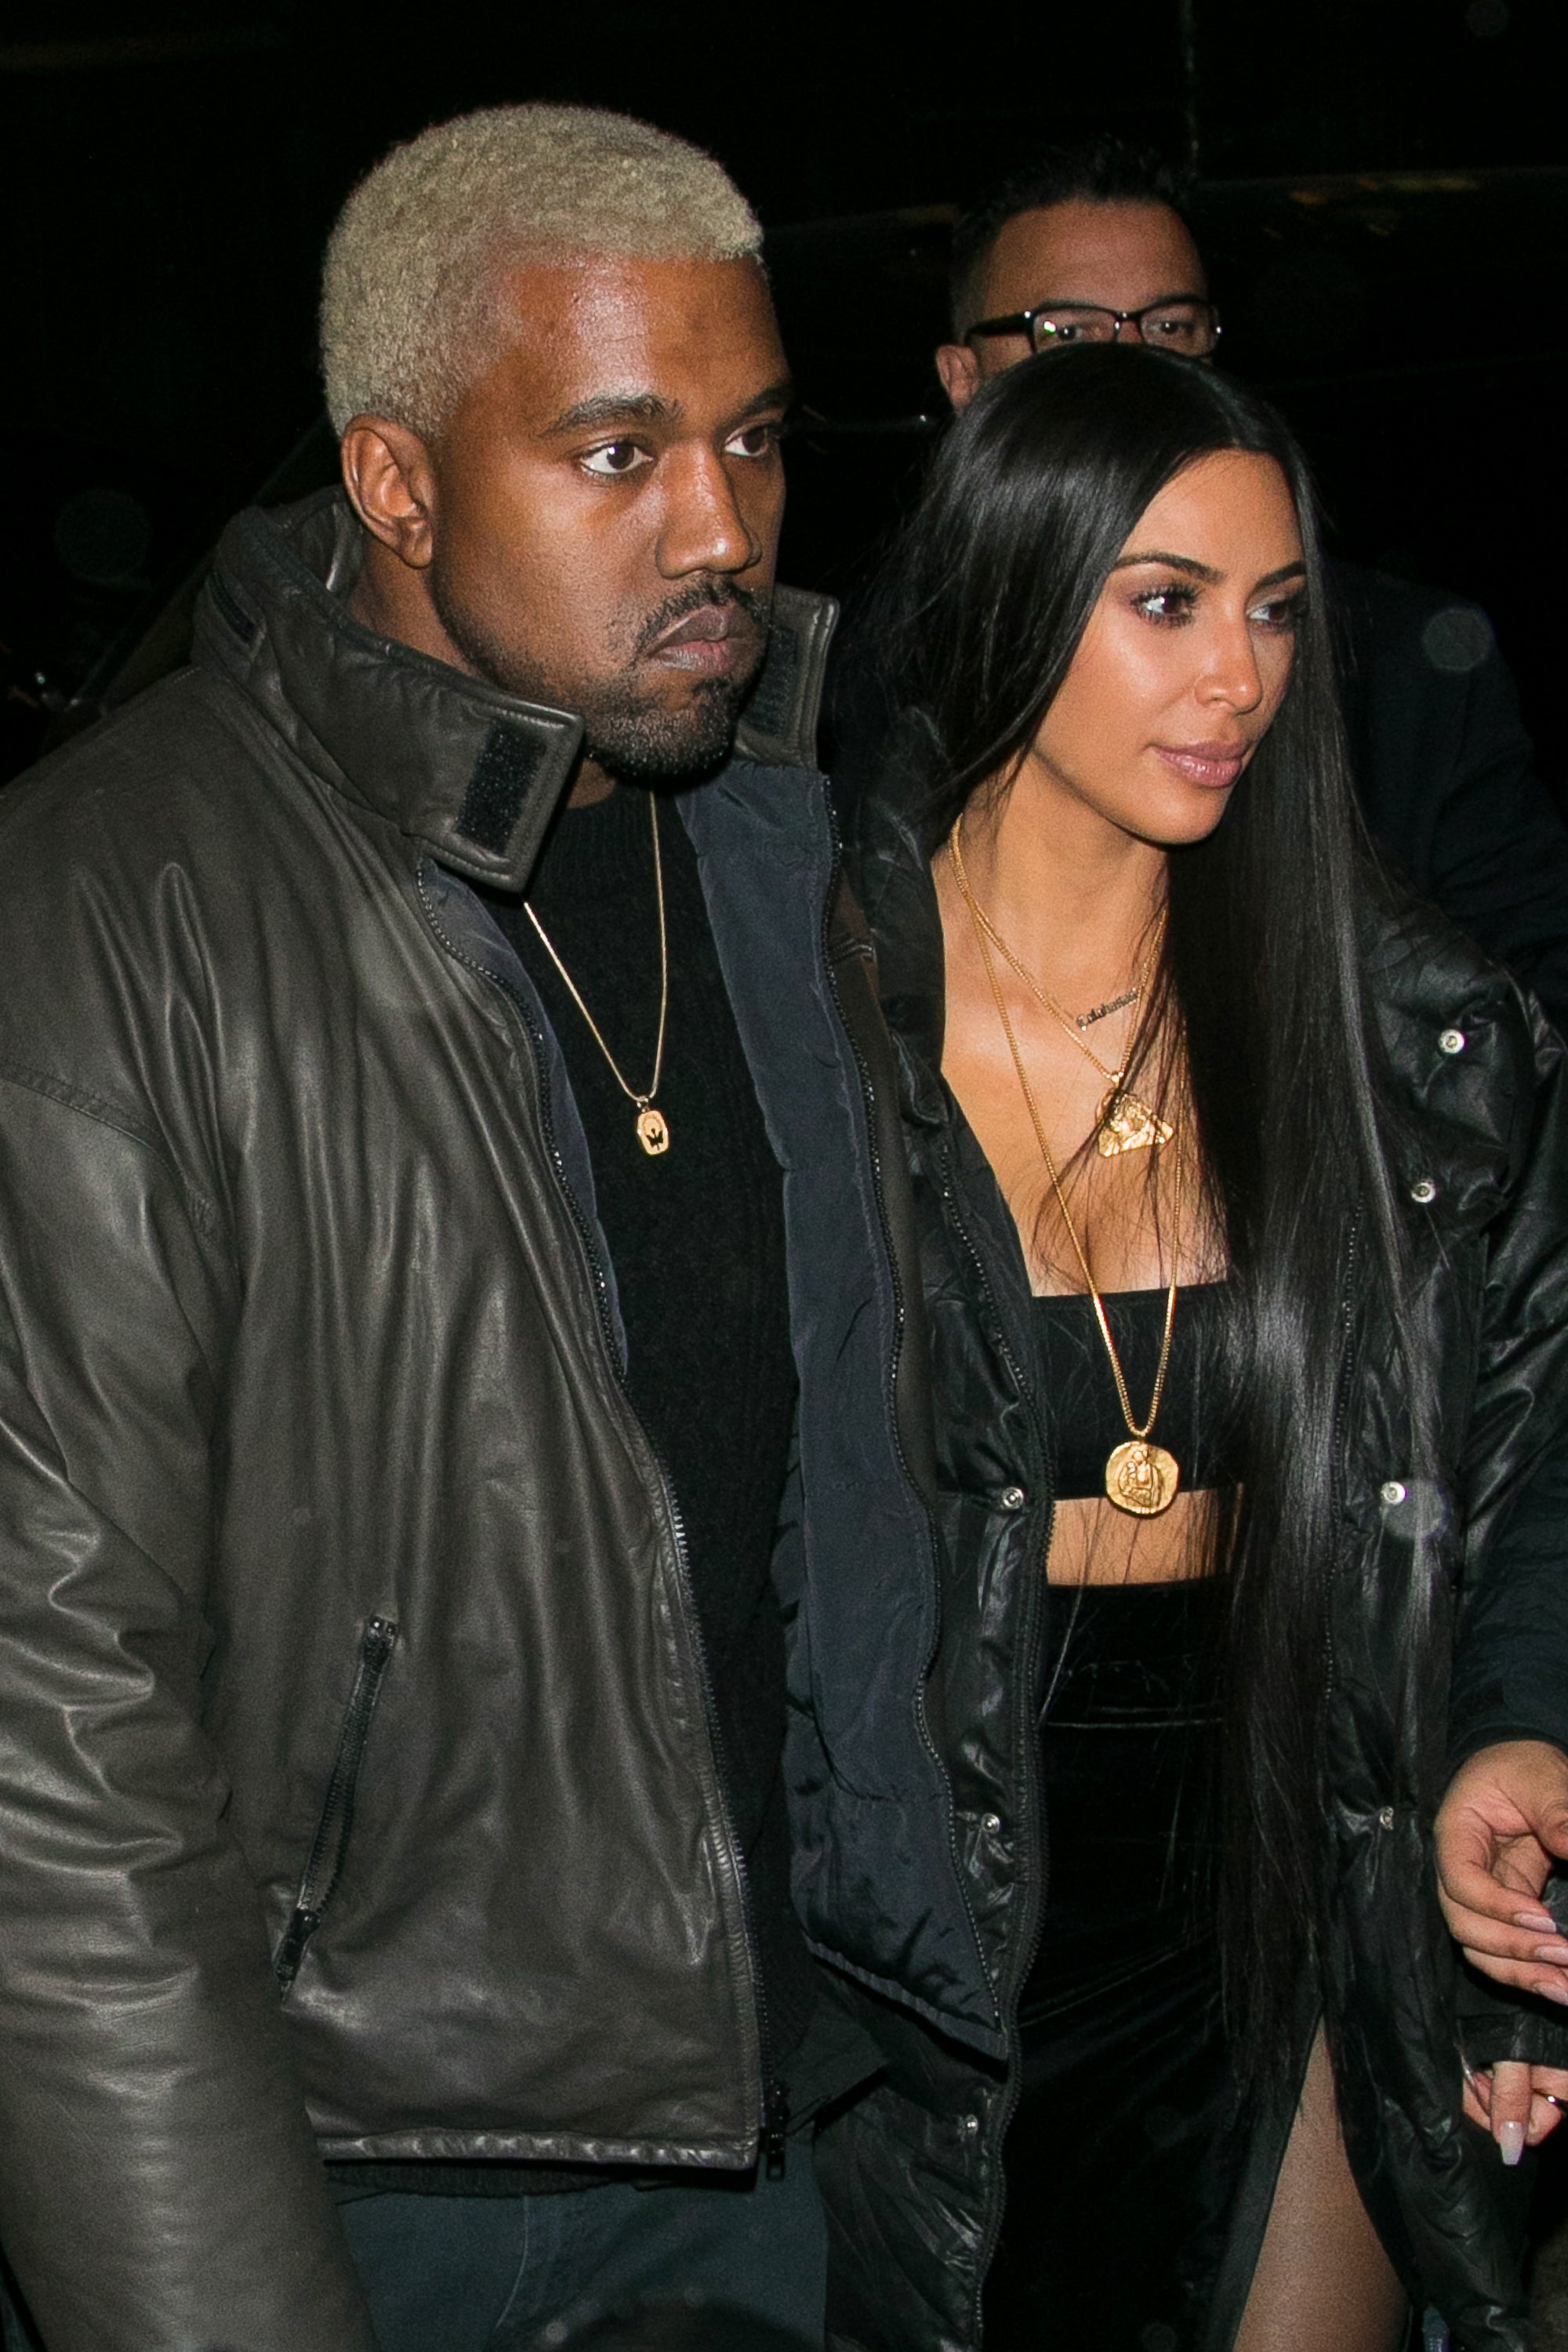 Kim Can’t Save Kanye: Why The Actions of Grown Men Are Not the Responsibility Of Their Wives
